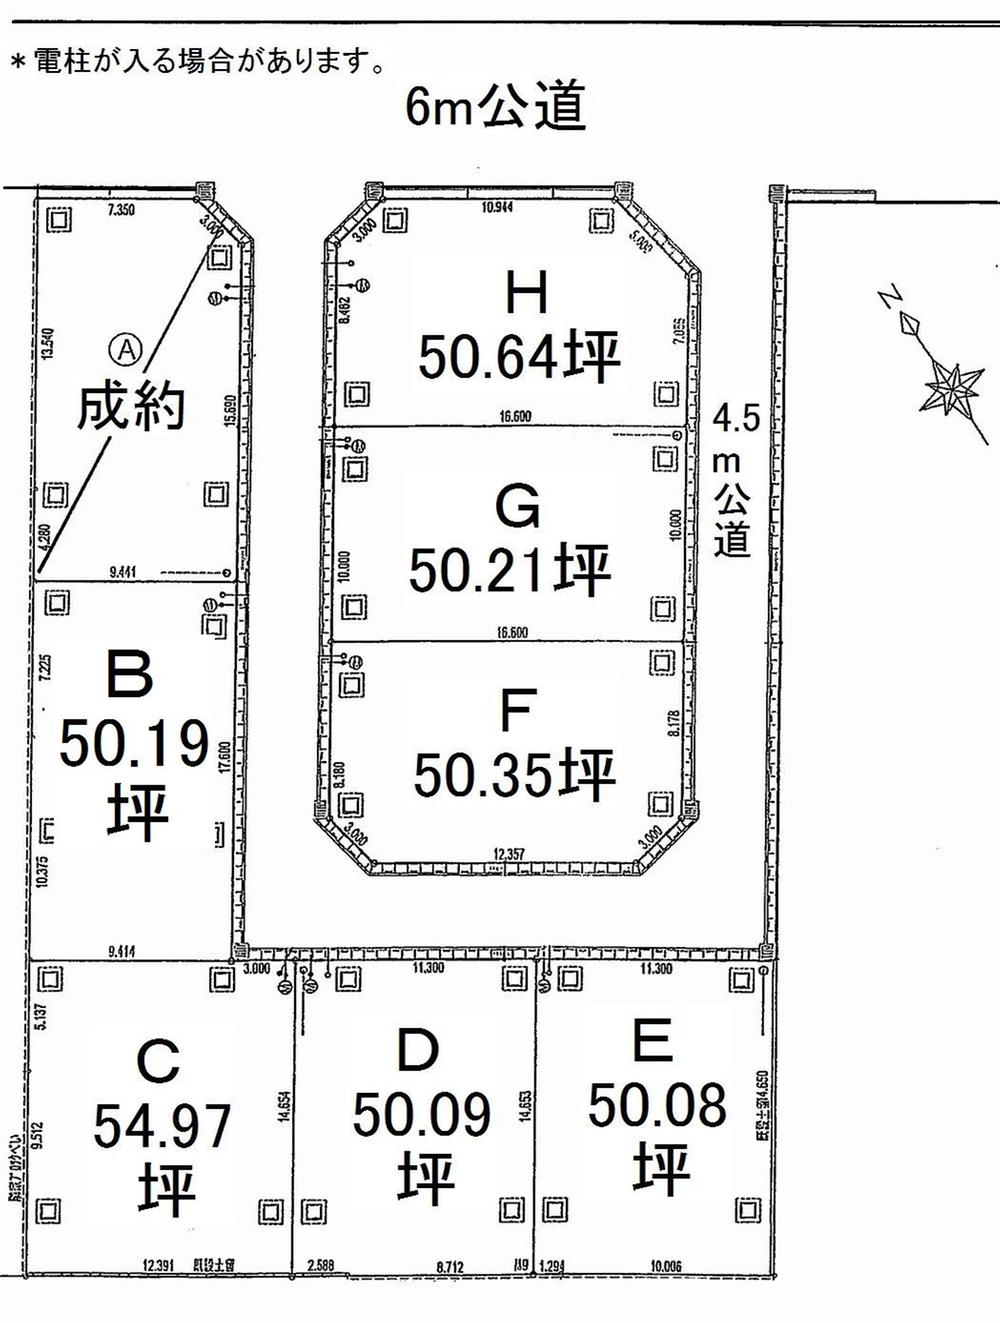 Compartment figure. Land price 20,140,000 yen, A pane view of the entire land area 166.47 sq m. 